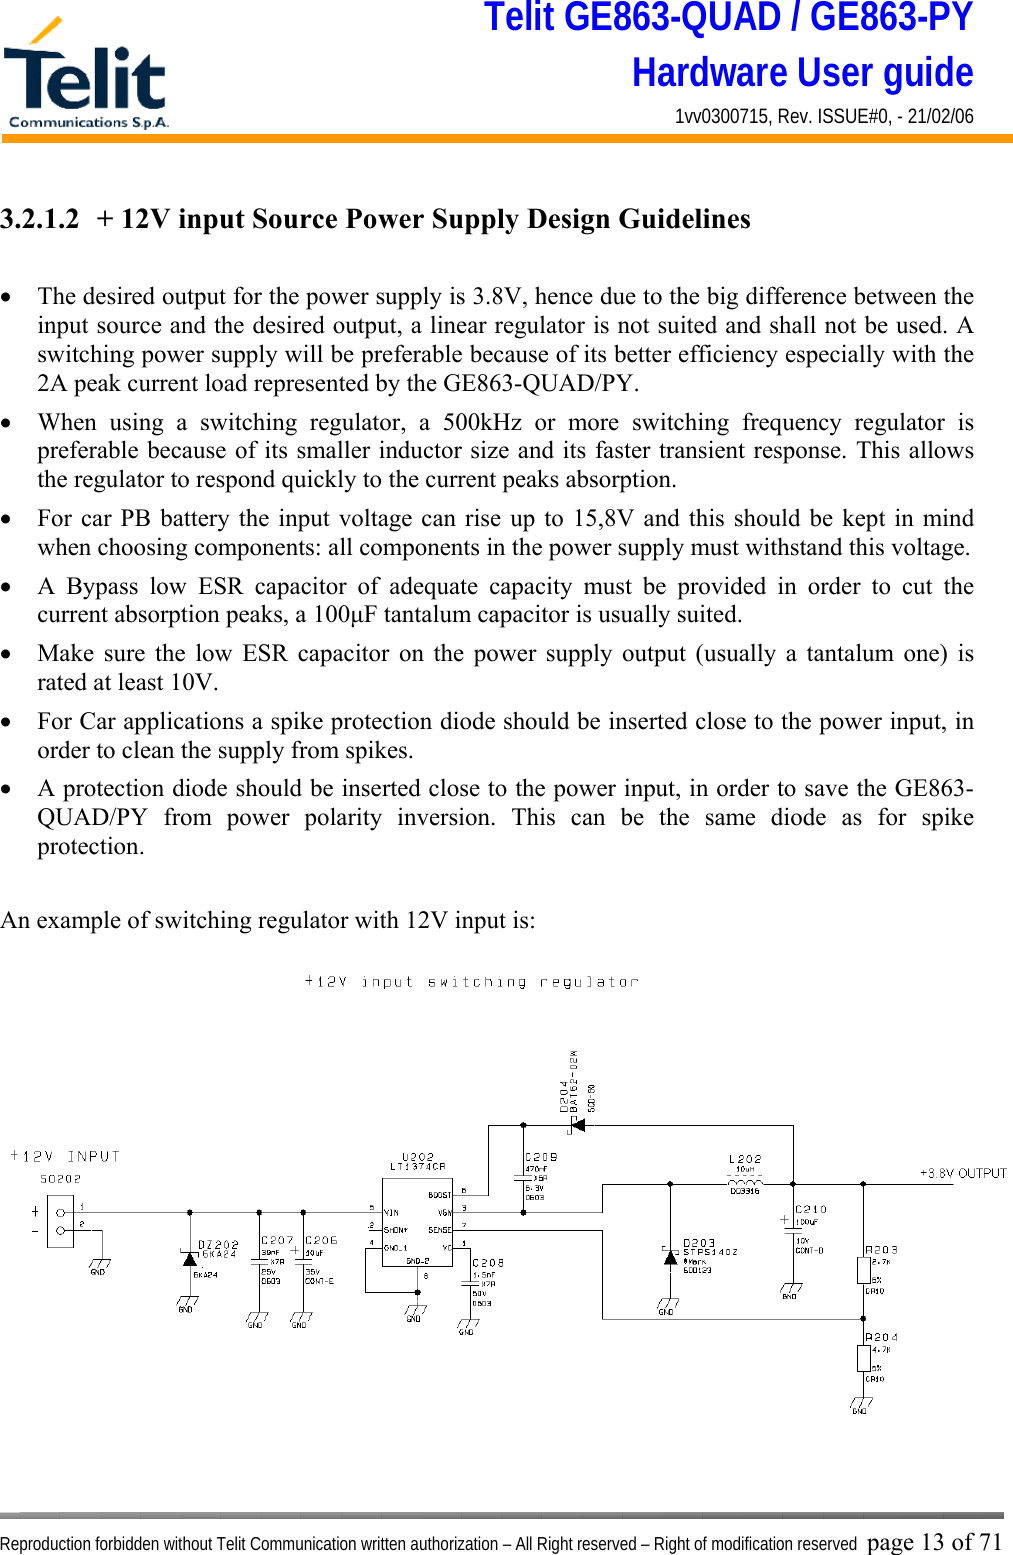 Telit GE863-QUAD / GE863-PY Hardware User guide 1vv0300715, Rev. ISSUE#0, - 21/02/06    Reproduction forbidden without Telit Communication written authorization – All Right reserved – Right of modification reserved page 13 of 71 3.2.1.2  + 12V input Source Power Supply Design Guidelines  •  The desired output for the power supply is 3.8V, hence due to the big difference between the input source and the desired output, a linear regulator is not suited and shall not be used. A switching power supply will be preferable because of its better efficiency especially with the 2A peak current load represented by the GE863-QUAD/PY. •  When using a switching regulator, a 500kHz or more switching frequency regulator is preferable because of its smaller inductor size and its faster transient response. This allows the regulator to respond quickly to the current peaks absorption.  •  For car PB battery the input voltage can rise up to 15,8V and this should be kept in mind when choosing components: all components in the power supply must withstand this voltage. •  A Bypass low ESR capacitor of adequate capacity must be provided in order to cut the current absorption peaks, a 100μF tantalum capacitor is usually suited. •  Make sure the low ESR capacitor on the power supply output (usually a tantalum one) is rated at least 10V. •  For Car applications a spike protection diode should be inserted close to the power input, in order to clean the supply from spikes.  •  A protection diode should be inserted close to the power input, in order to save the GE863-QUAD/PY from power polarity inversion. This can be the same diode as for spike protection.  An example of switching regulator with 12V input is:  